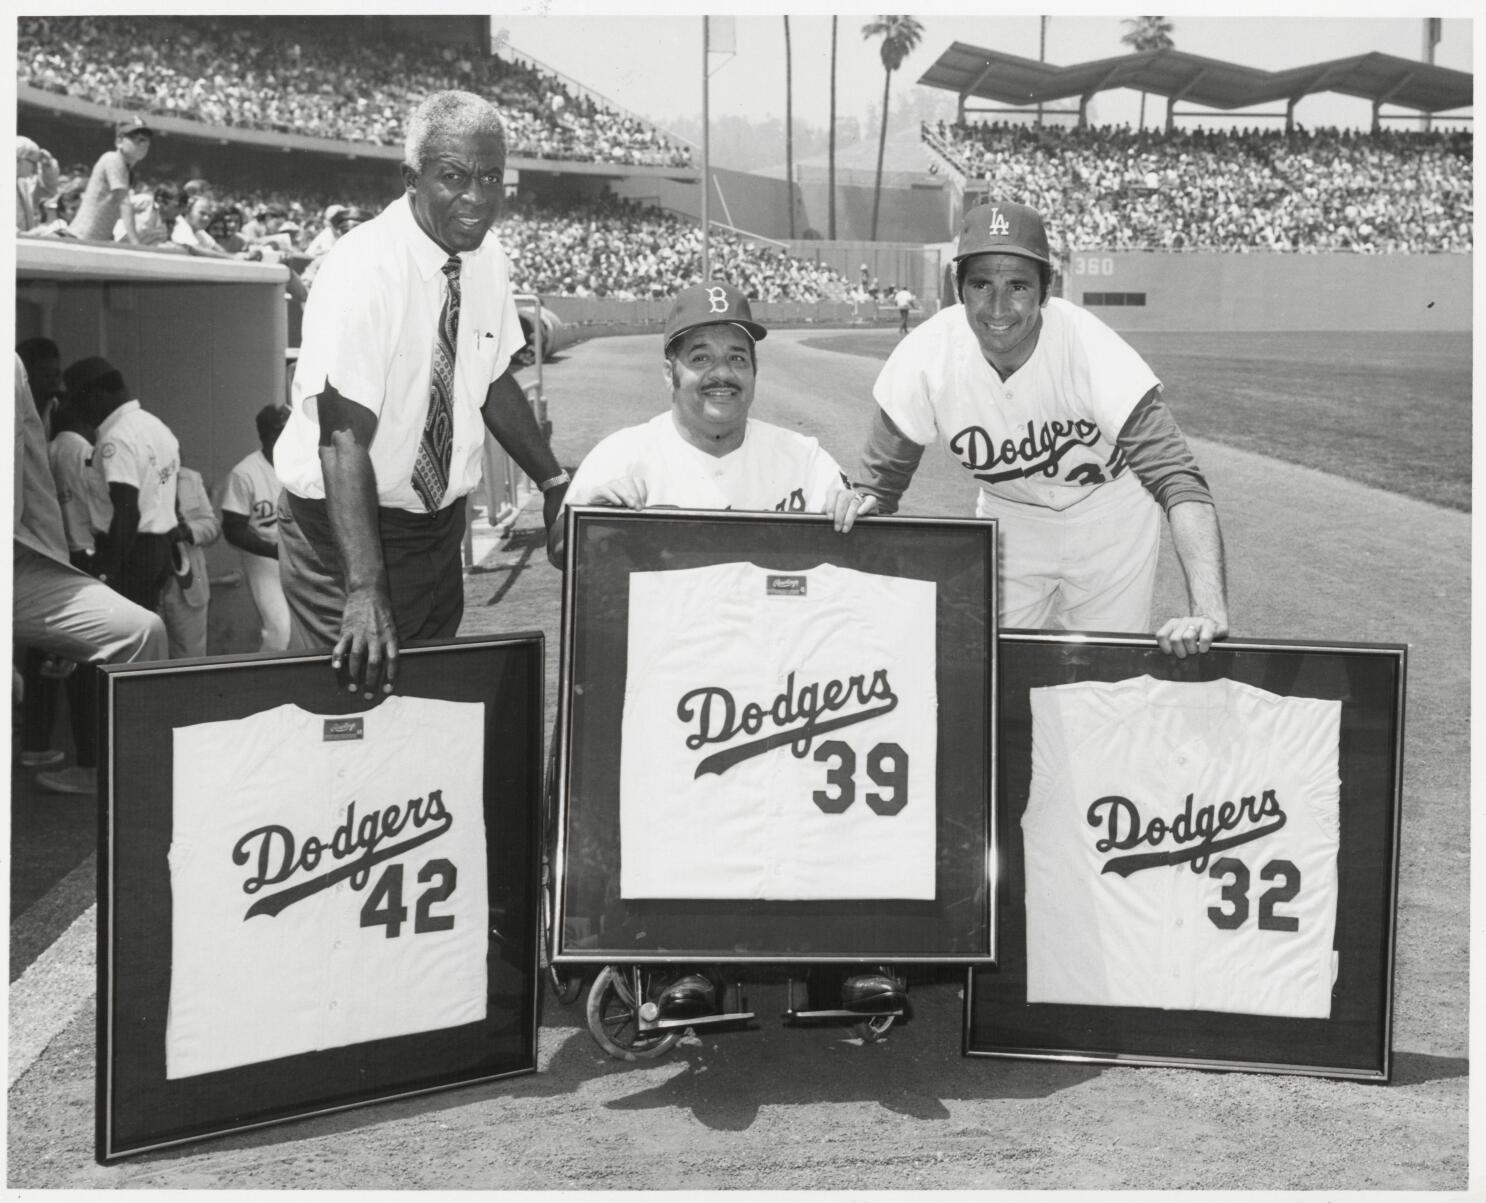 Lima Time'- One of Dodger Stadium's greatest memories